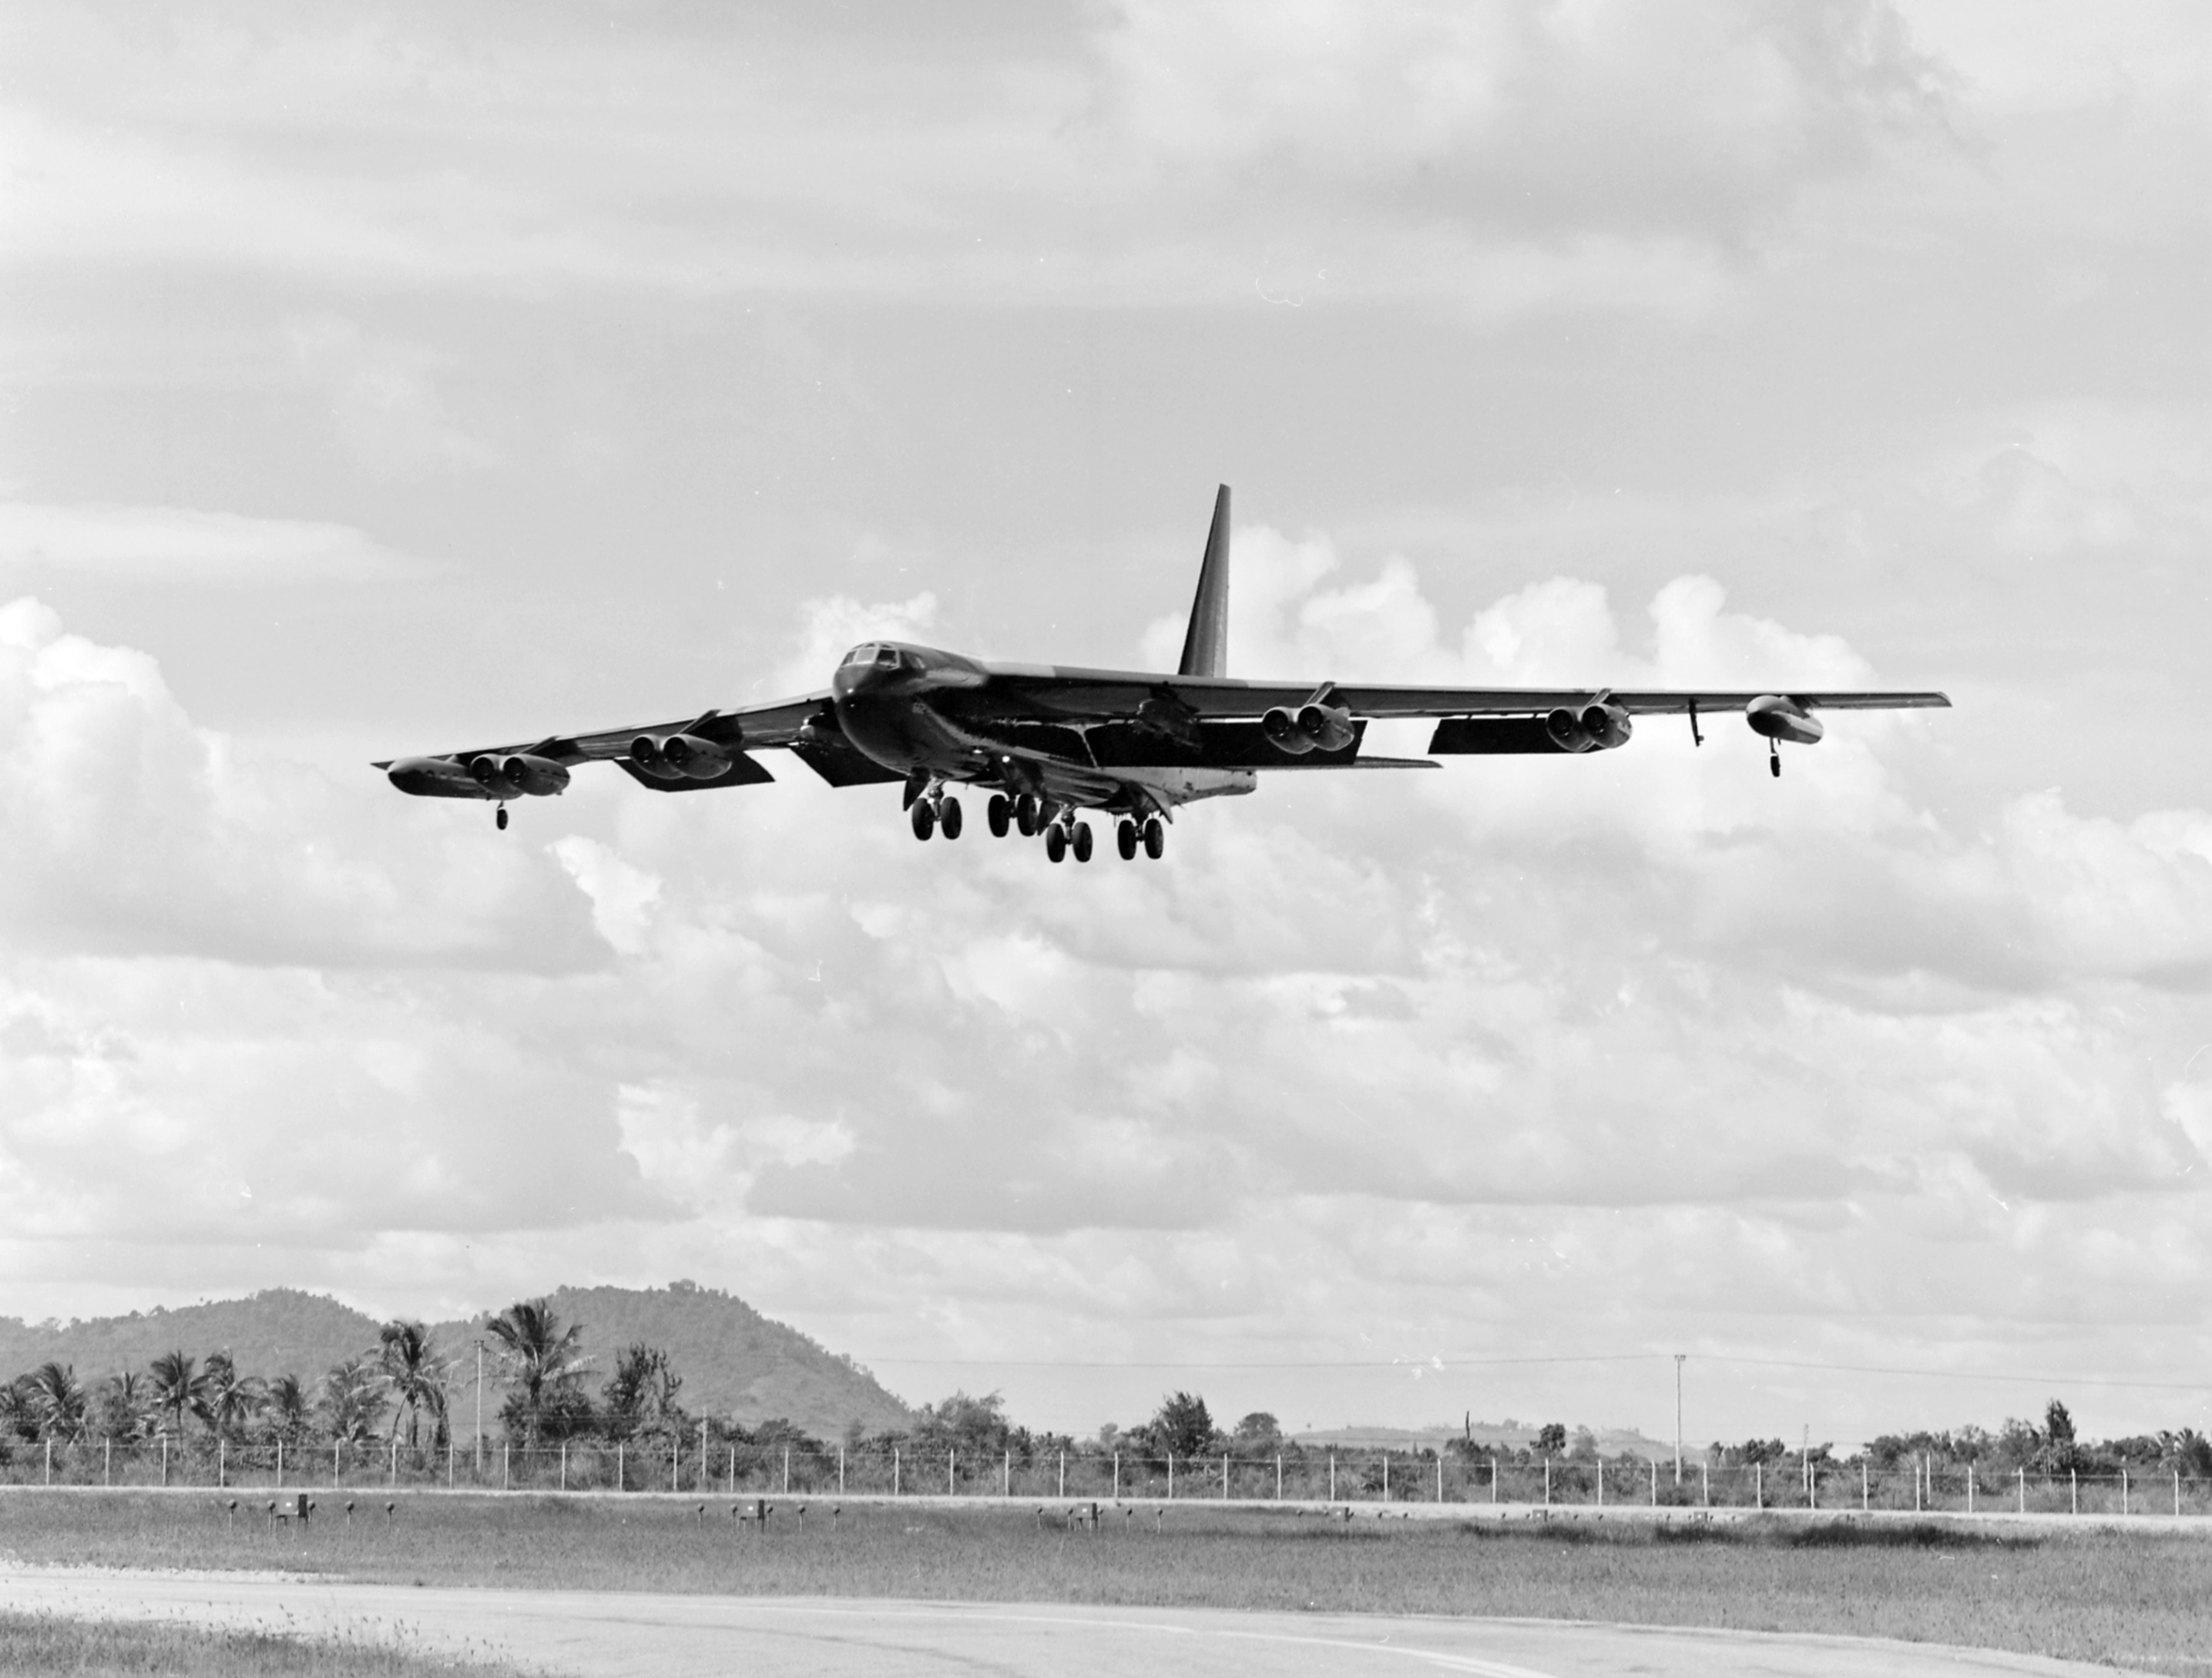 Boeing B-52D-30-BW Stratofortress 55-662 crosses the perimeter fence on approach to U-Tapao Airfield, Thailand. OLIVE 2 did not return from its final mission. (U.S. Air Force)